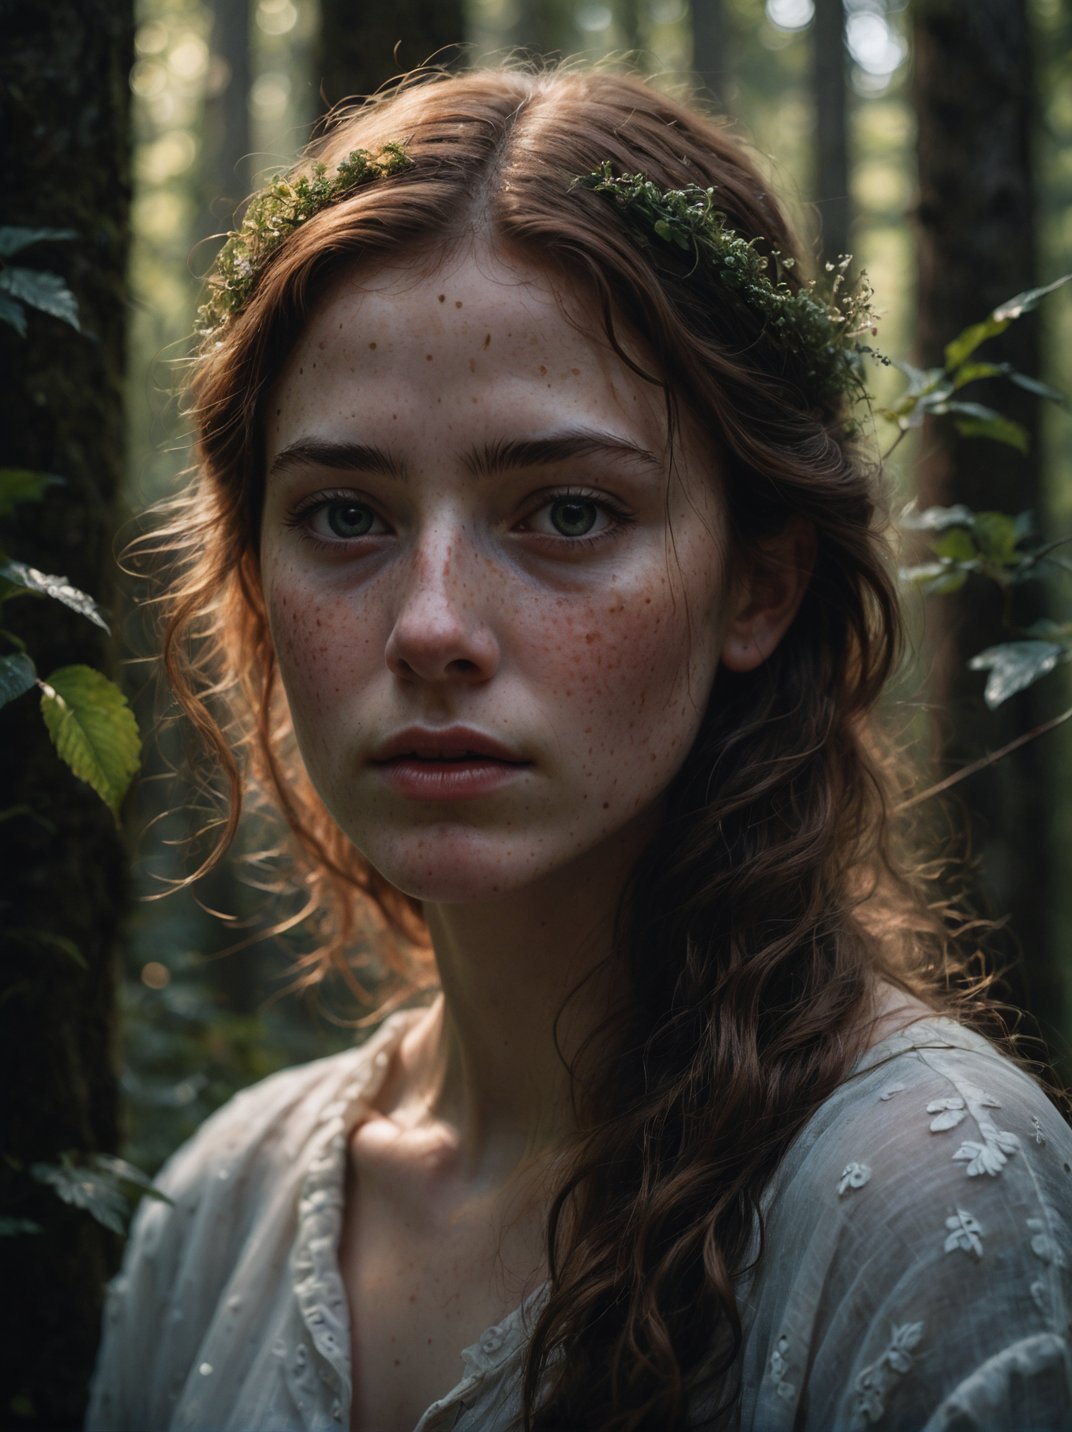 hyperrealistic amateur portrait of a young woman in the forest, magnificent, celestial, ethereal, painterly, epic, magical, fantasy art, dreamy, chiaroscuro, atmospheric lighting, freckles, skin pores, pores, velus hair, macro, extreme details